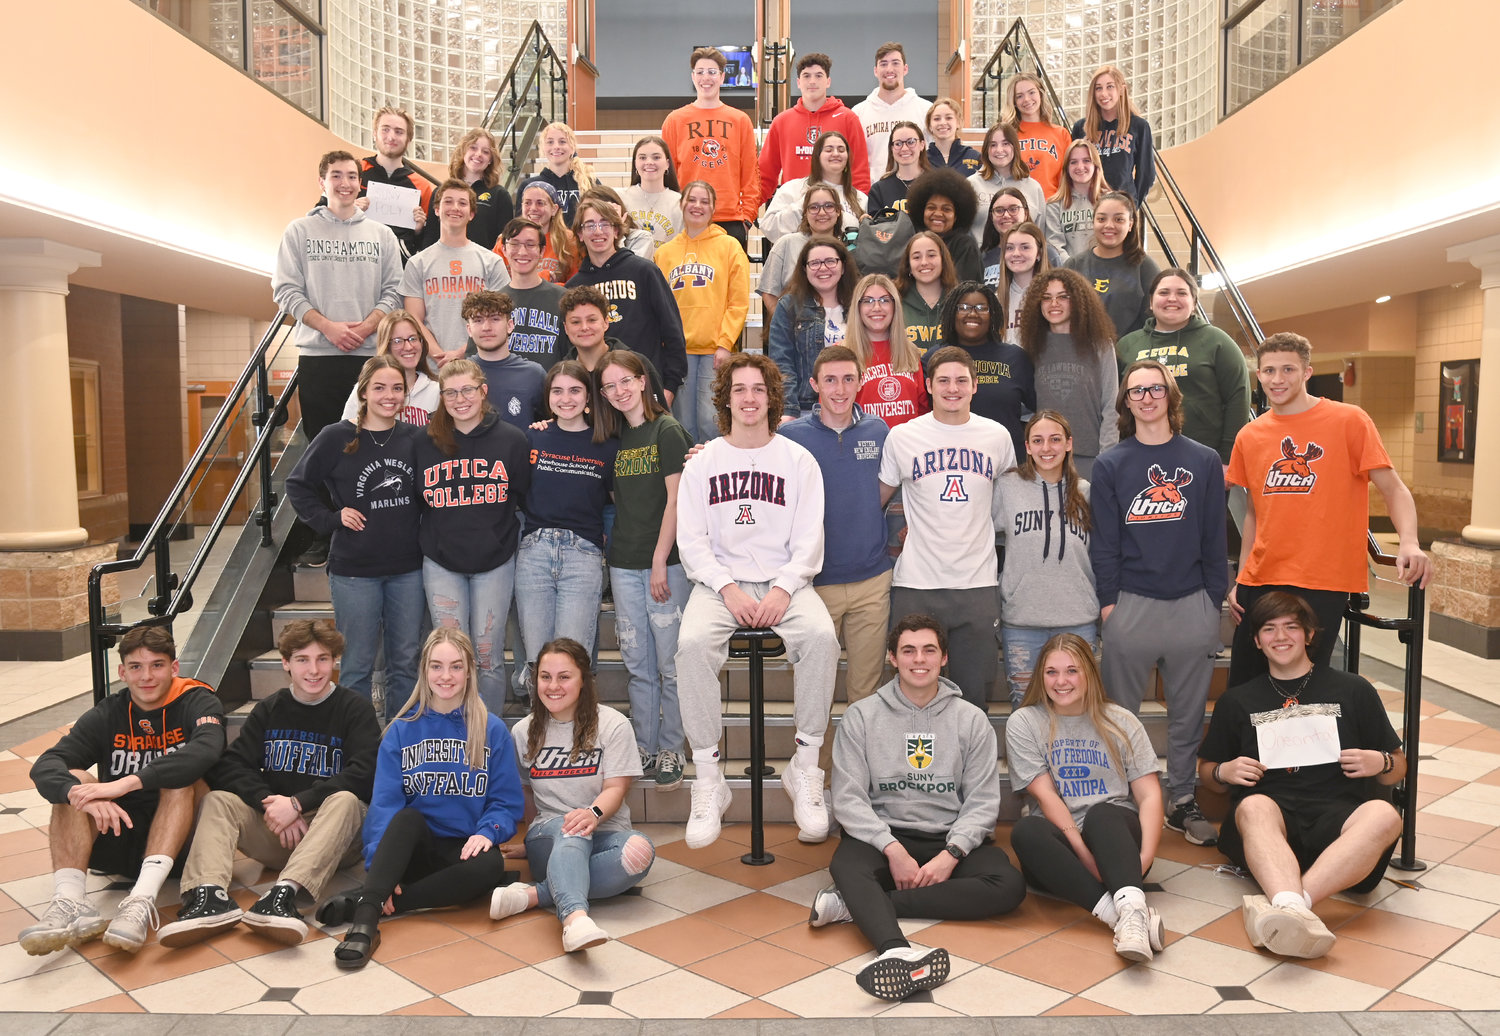 Decked out in the gear of their future colleges and universities, a group of several dozen seniors at Rome Free Academy pose for a group photo at the school on Monday. May 2, was National Decision Day, the deadline day for seniors to pick their institutions and enroll for the fall.